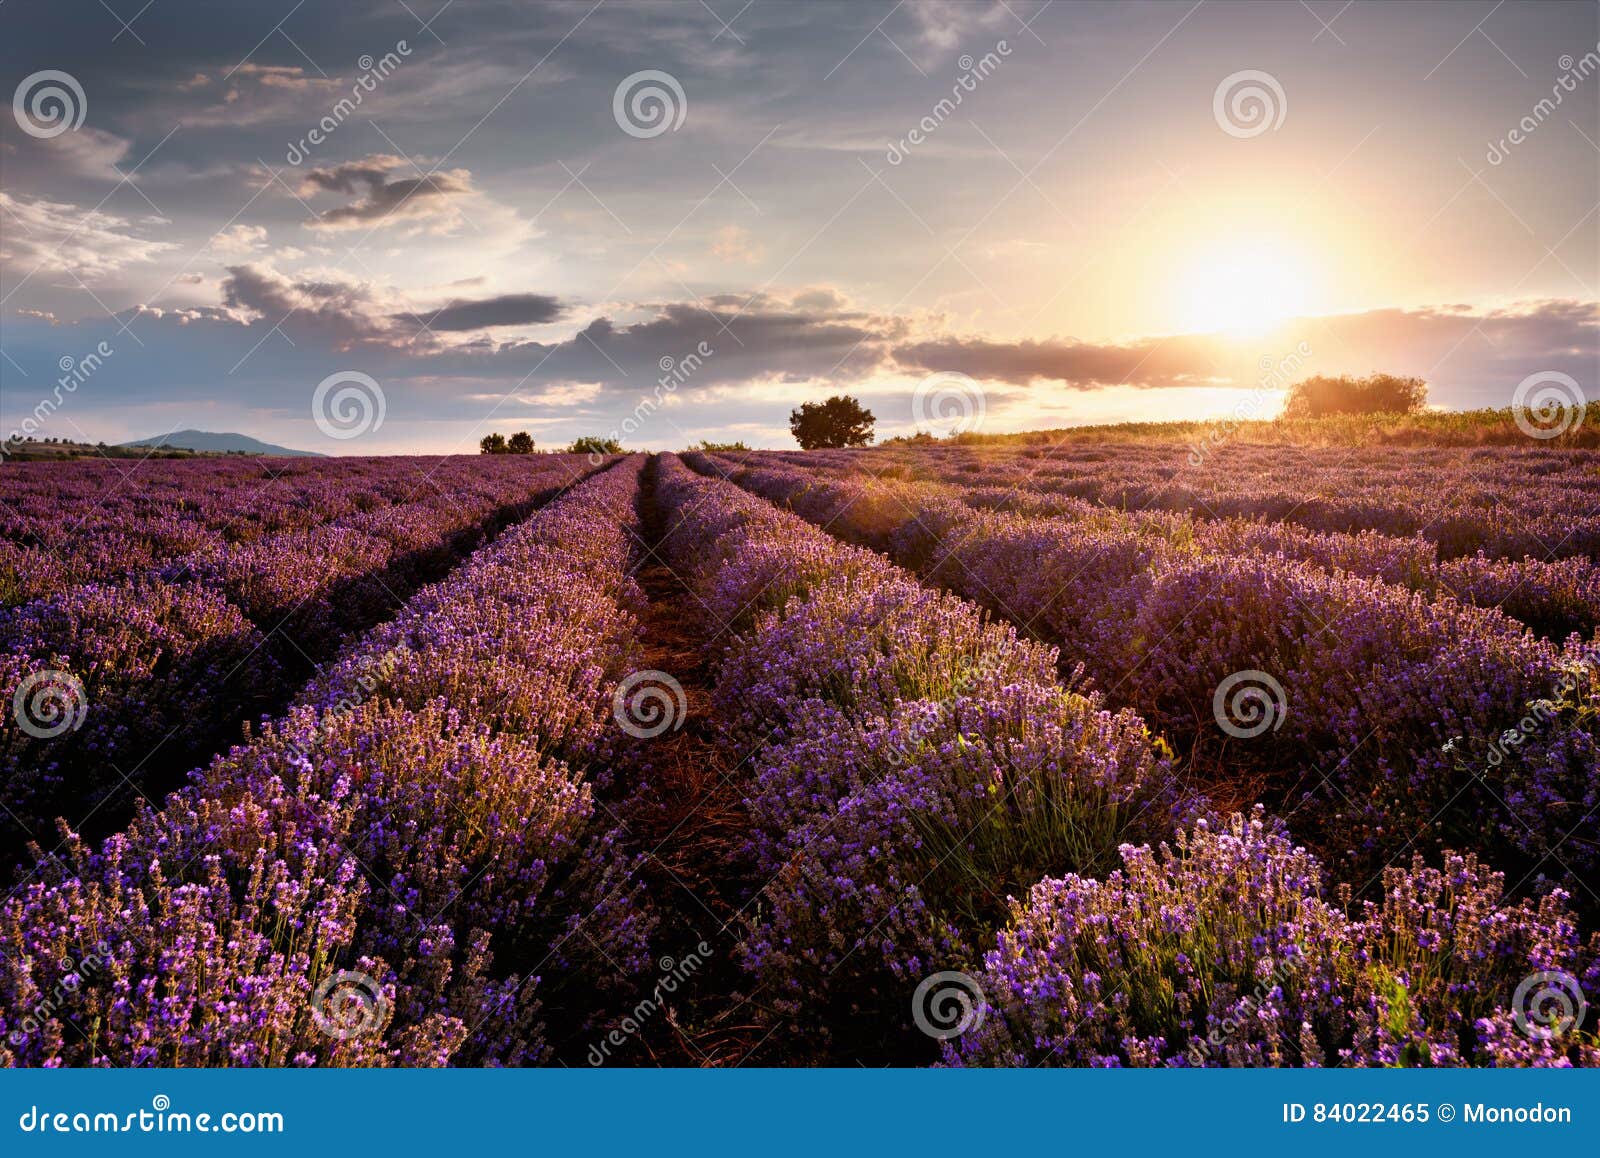 Sunset over lavender field stock image. Image of growth - 84022465